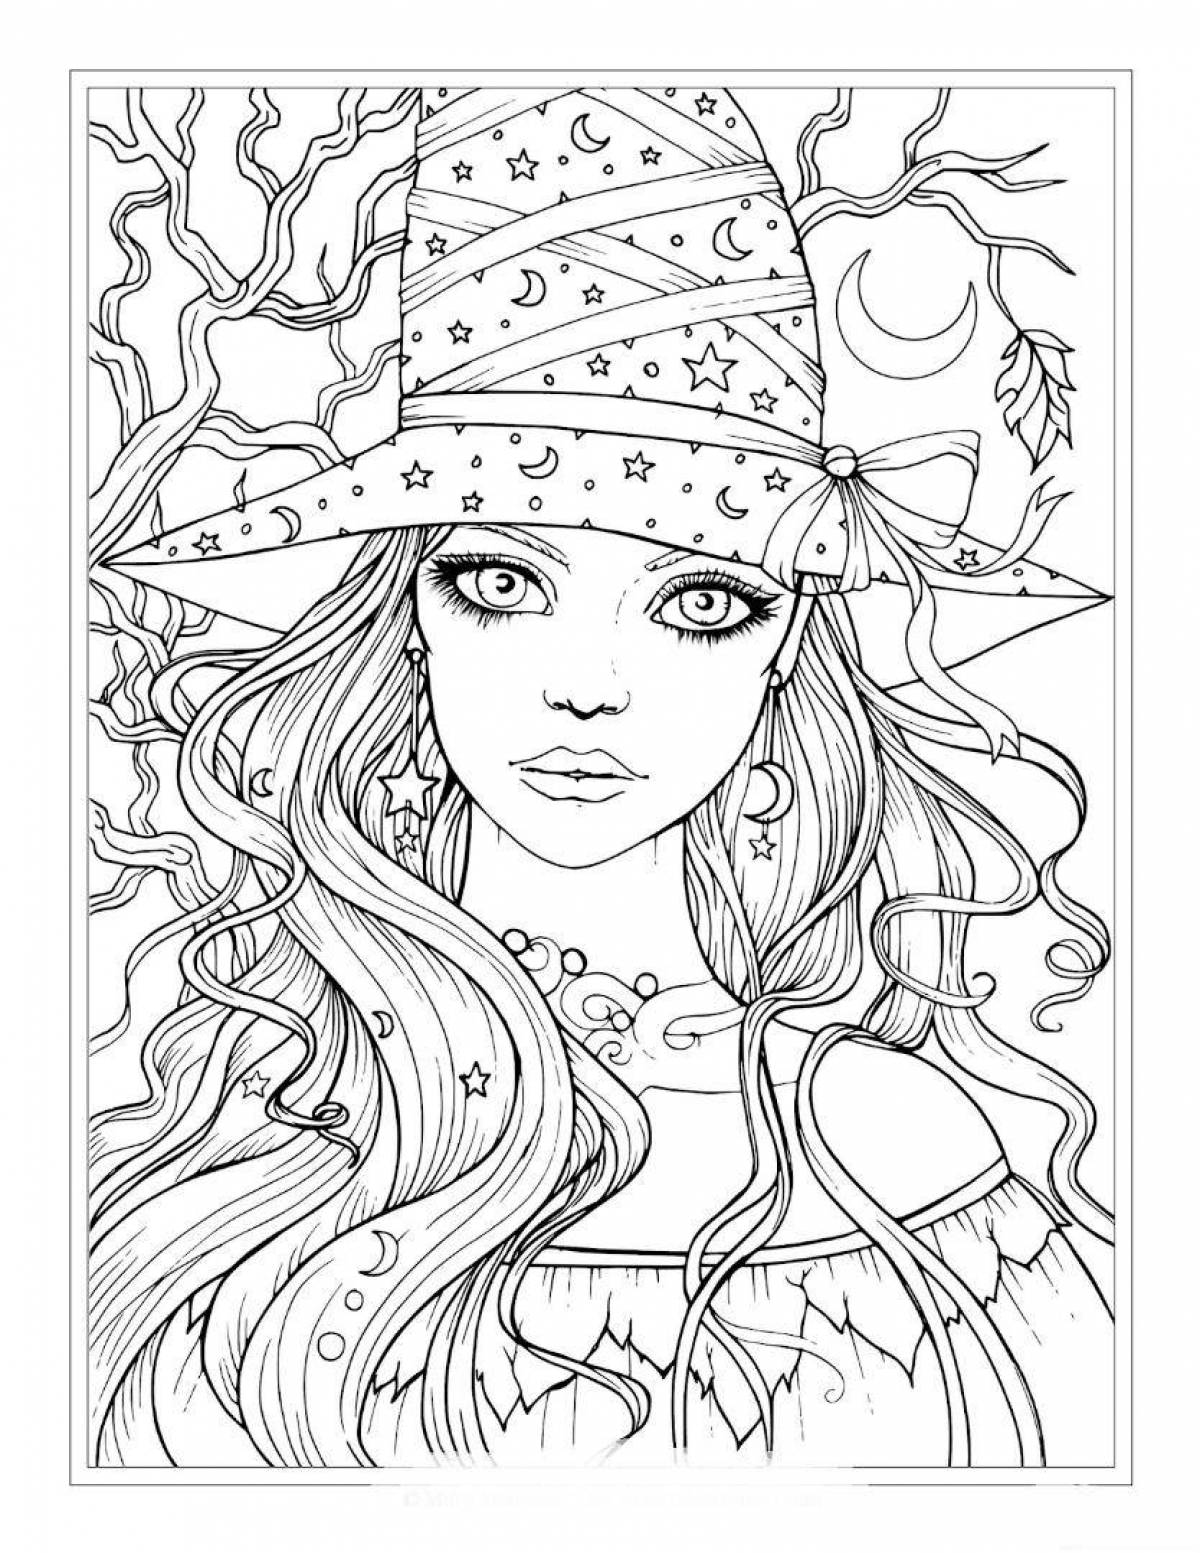 Fun coloring book for 11-13 year olds